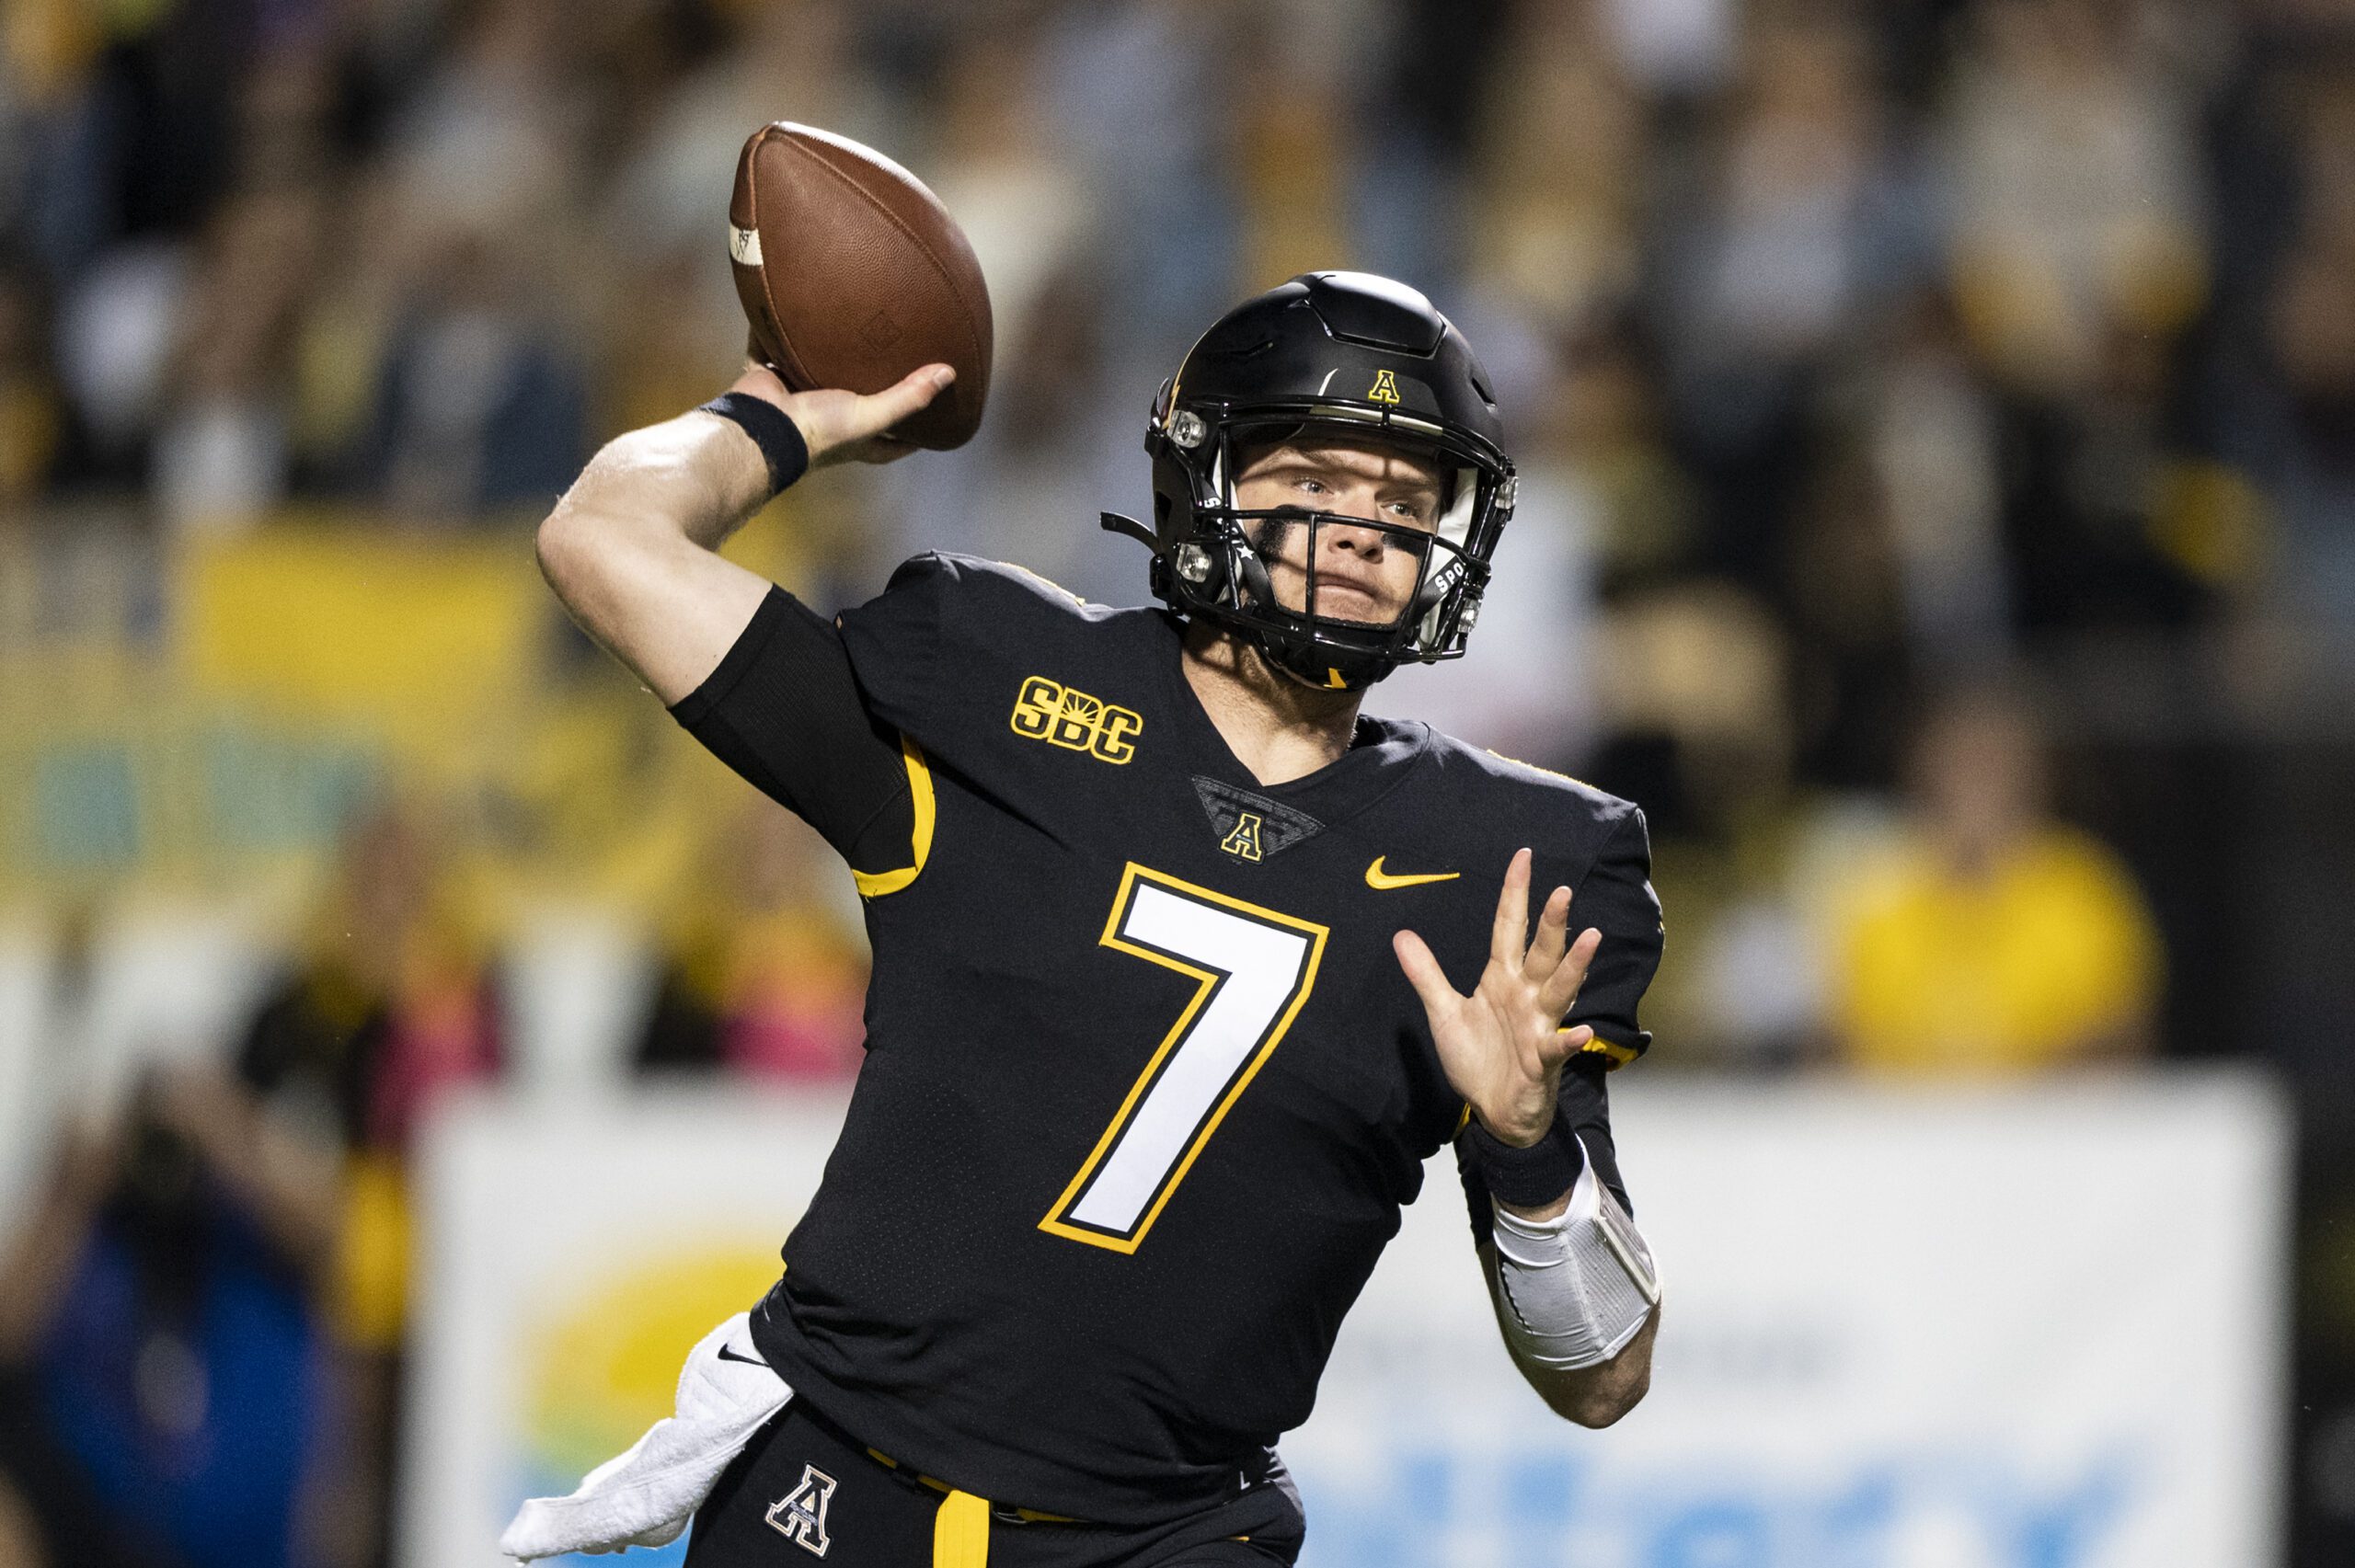 NSJ 2022 Comeback of the Year: App State defeats Troy with Hail Mary in wild finish | The North State Journal